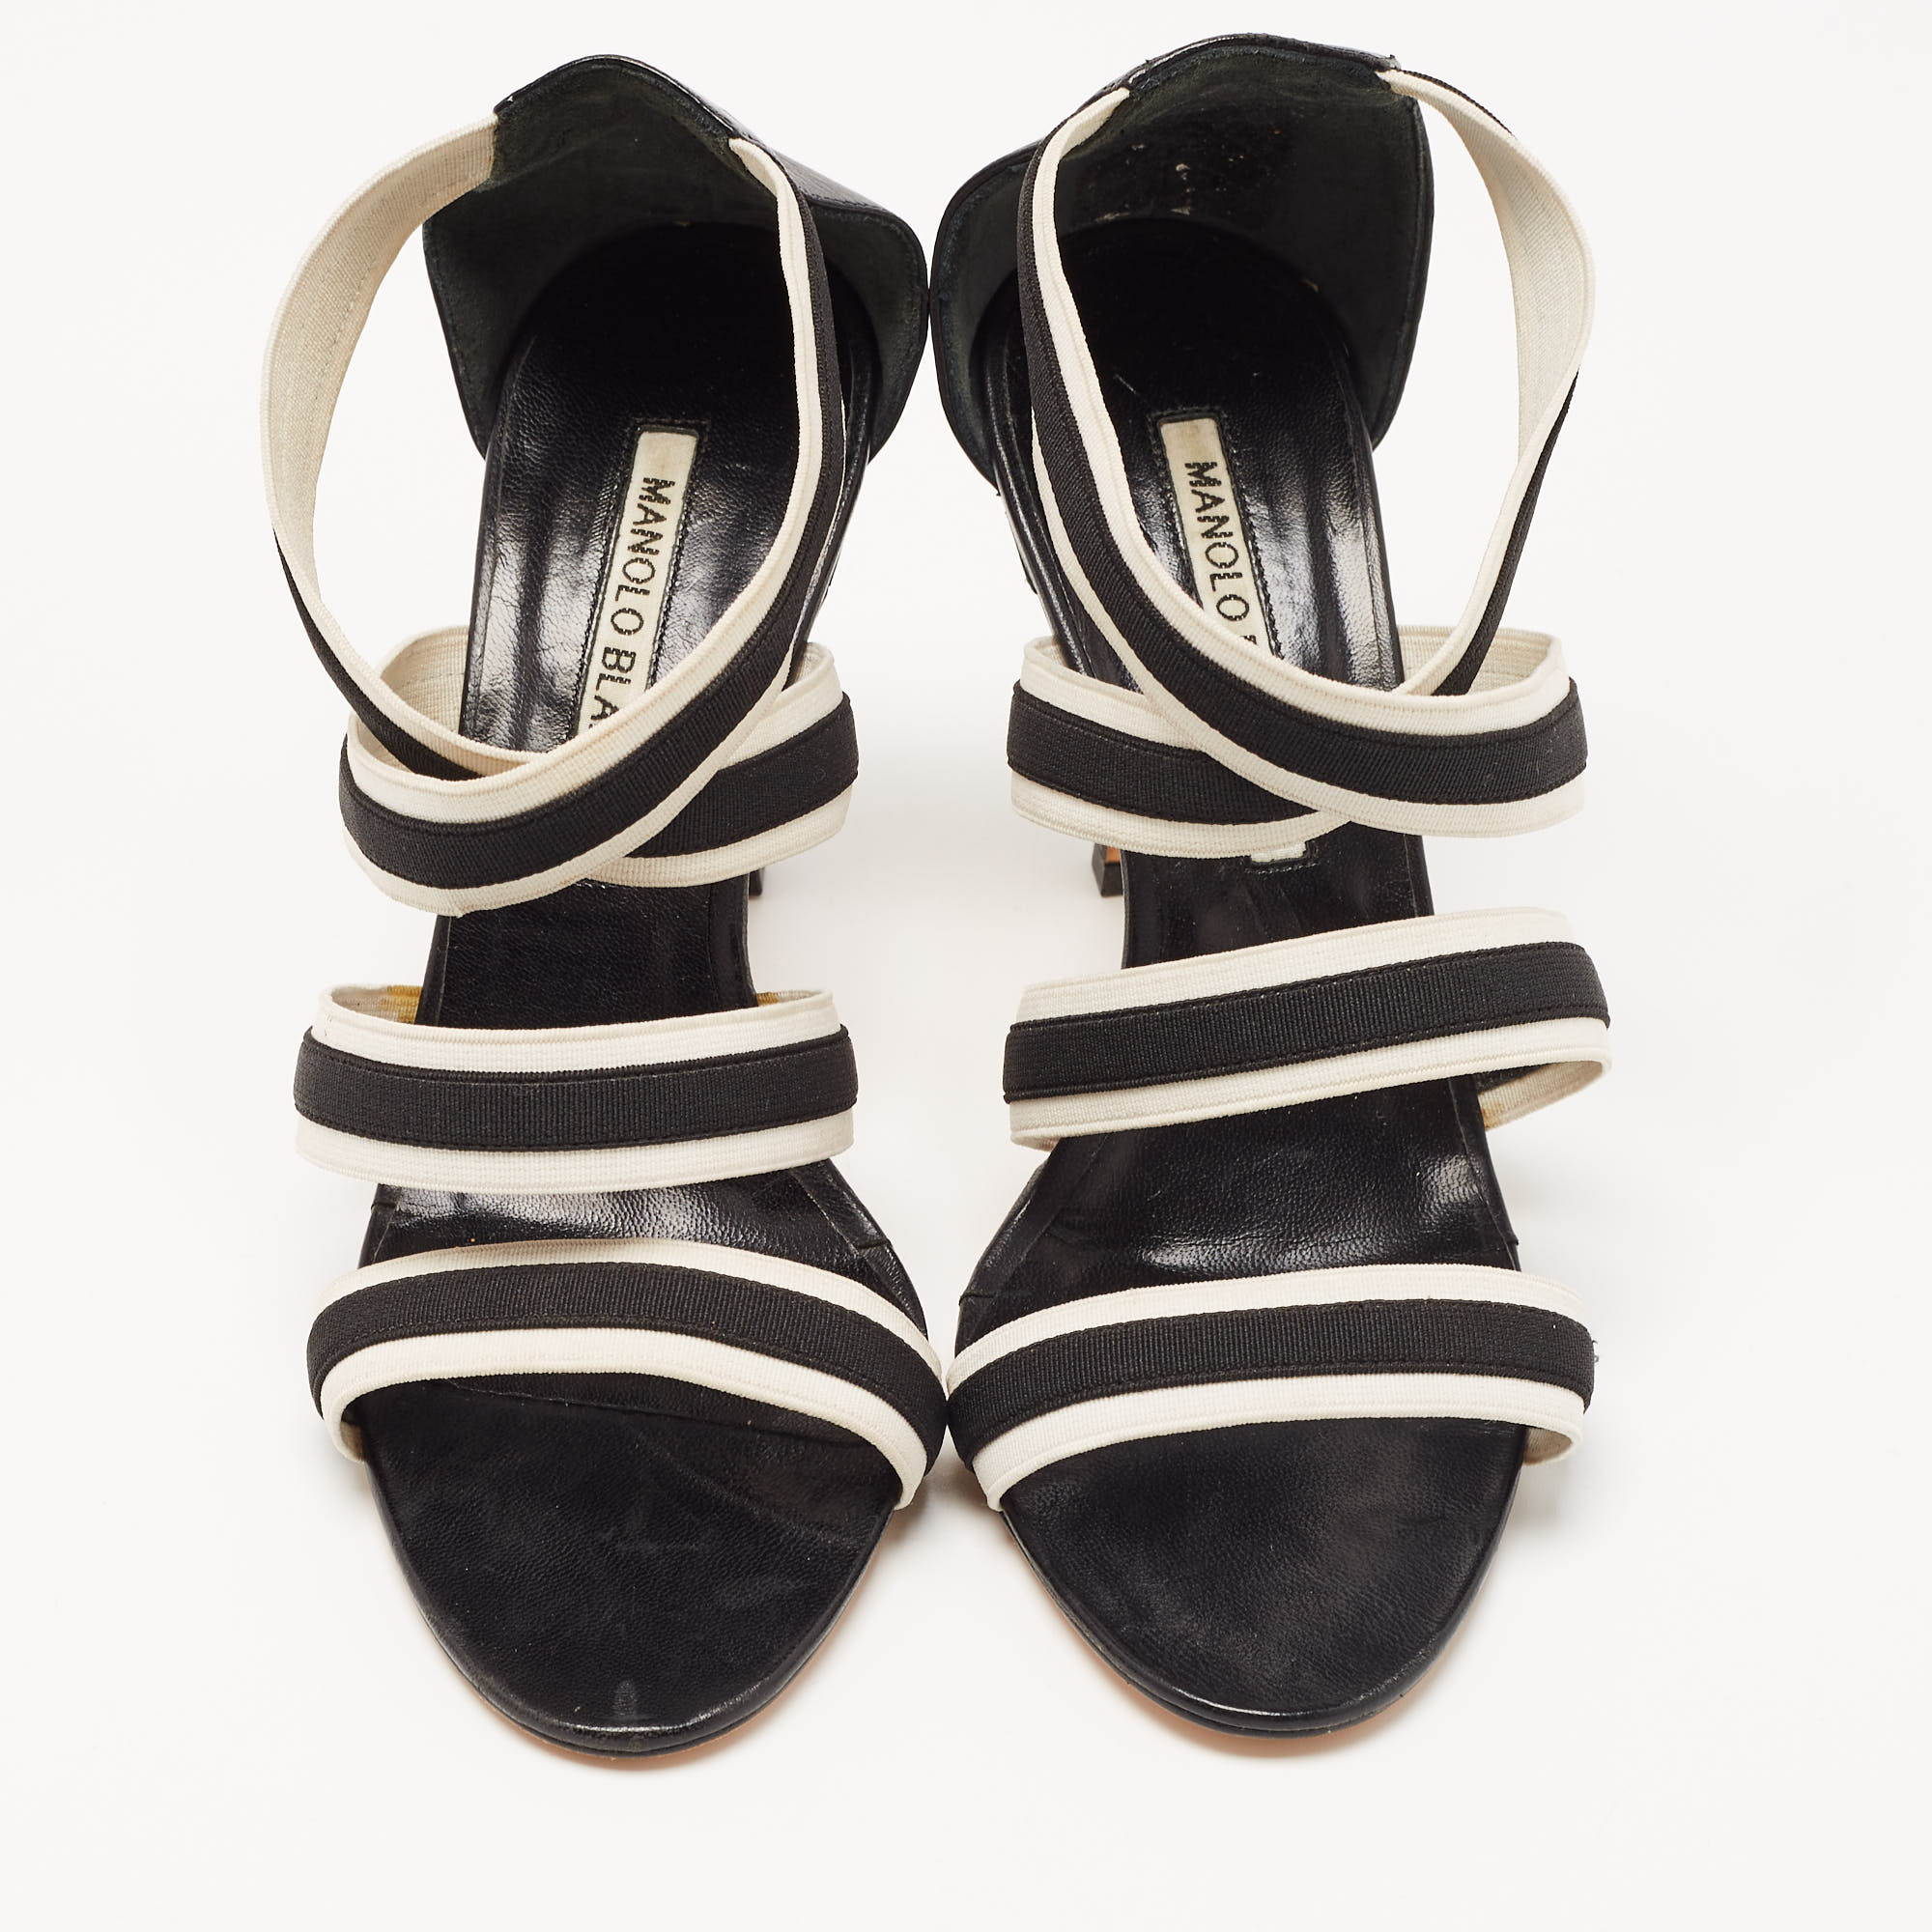 Manolo Blahnik Black/White Striped Elastic And Leather Ankle Strap Sandals Size 36